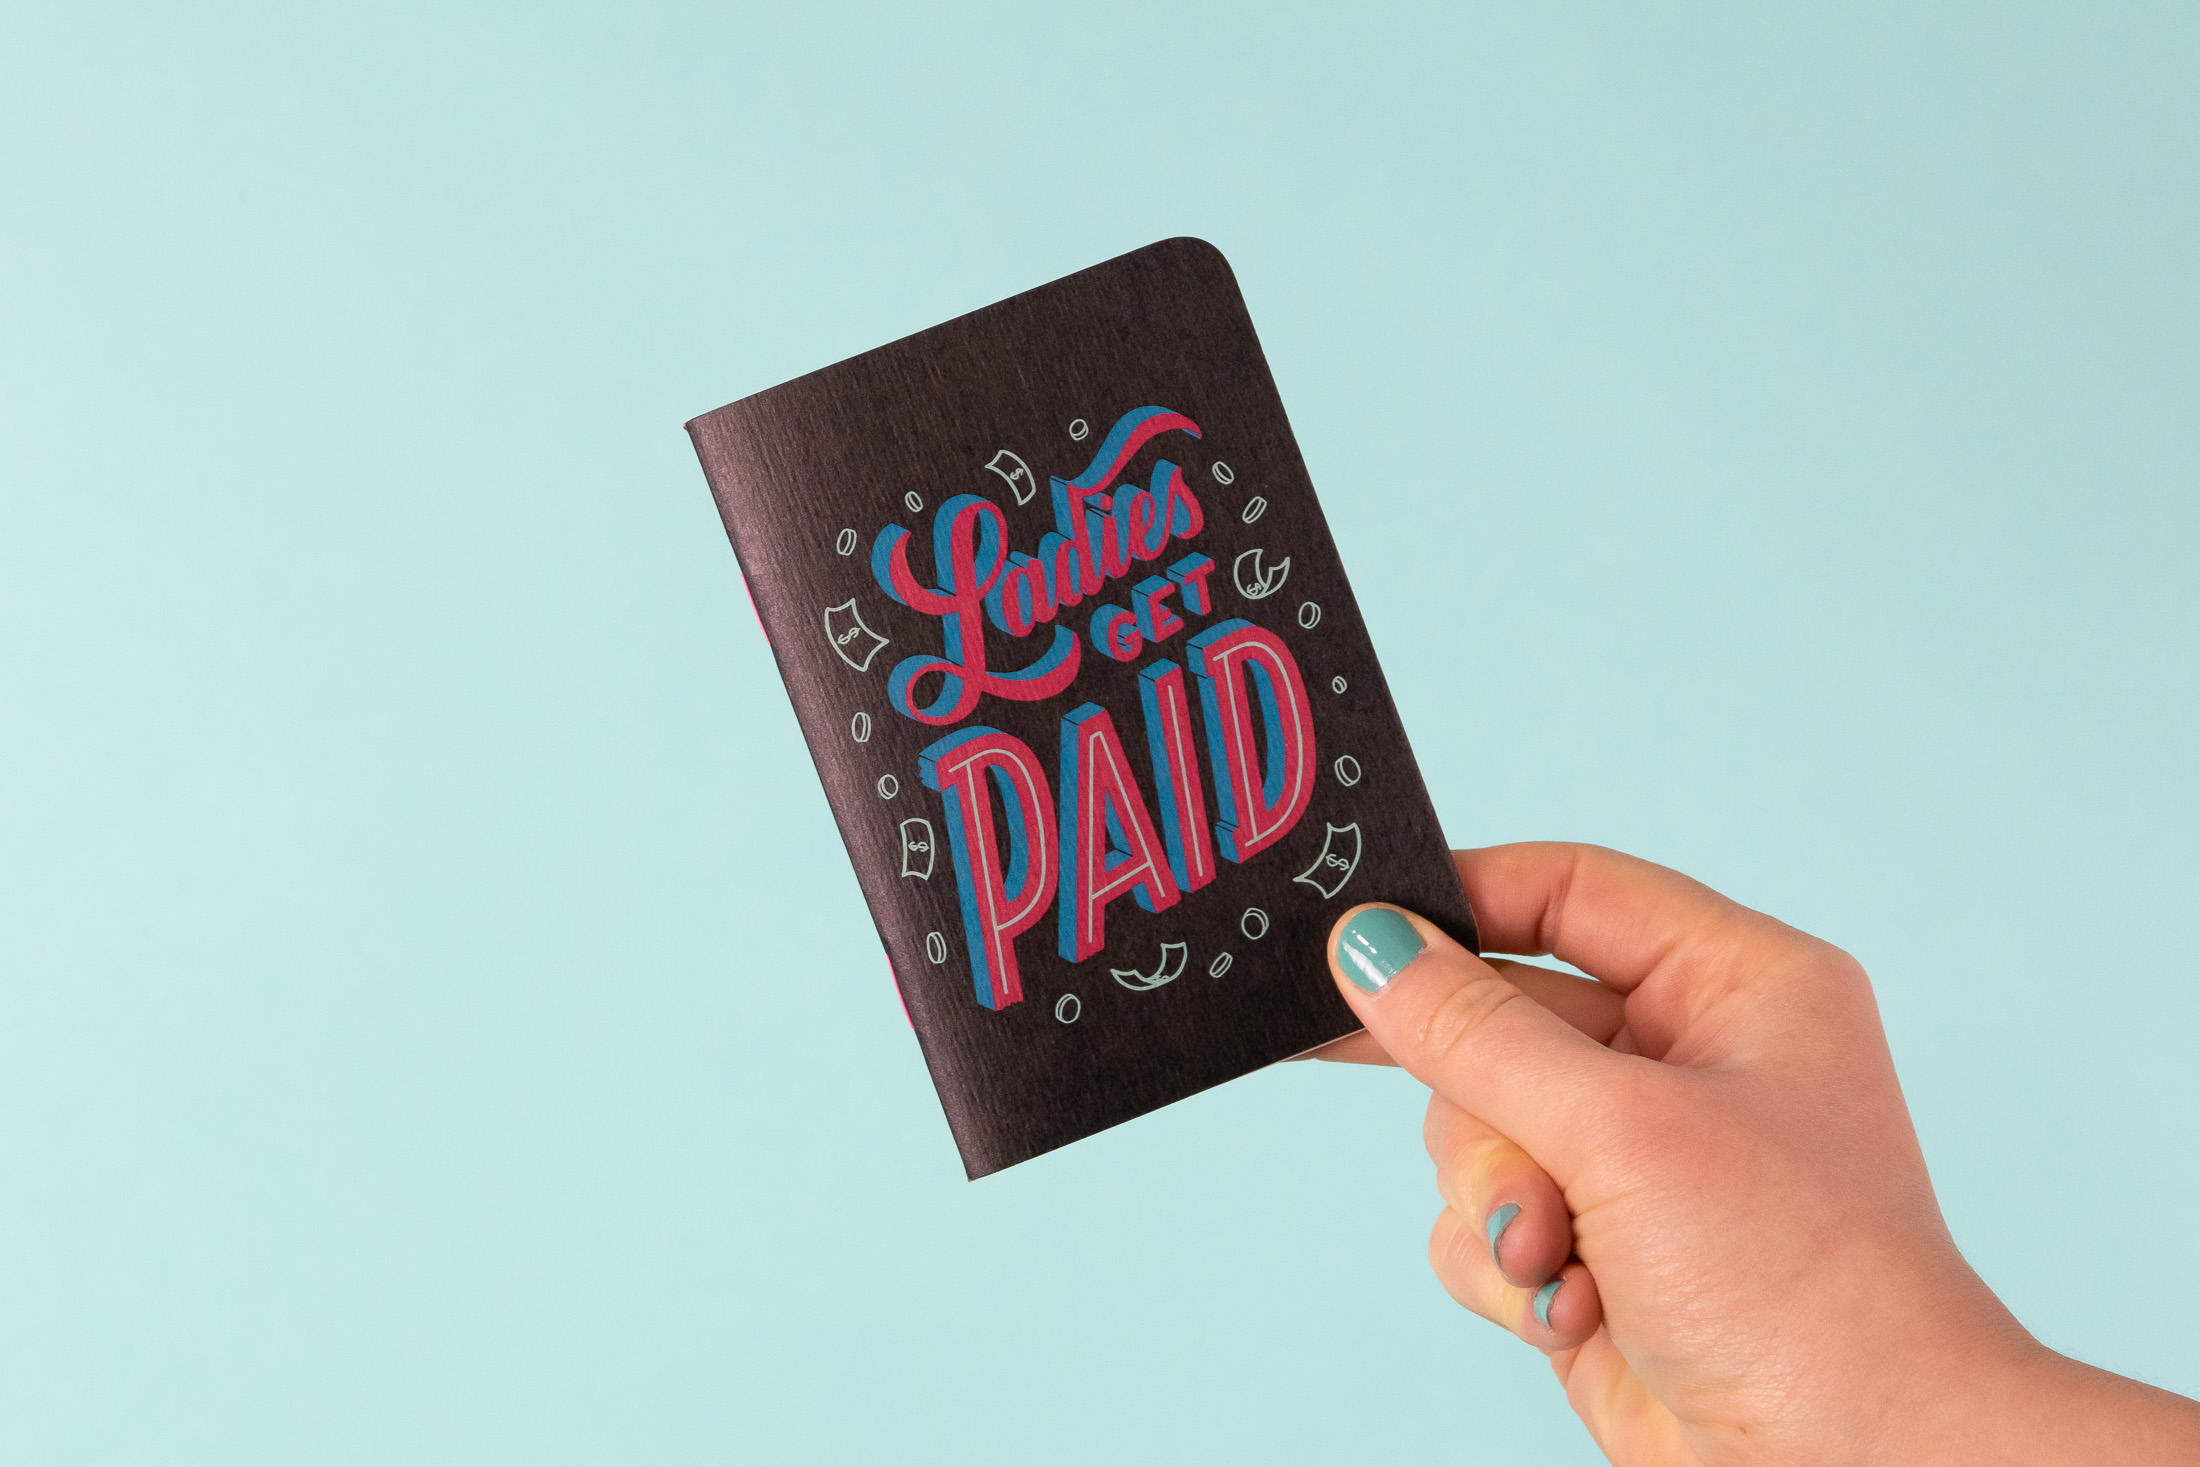 Ladies Get Paid - Scout Books